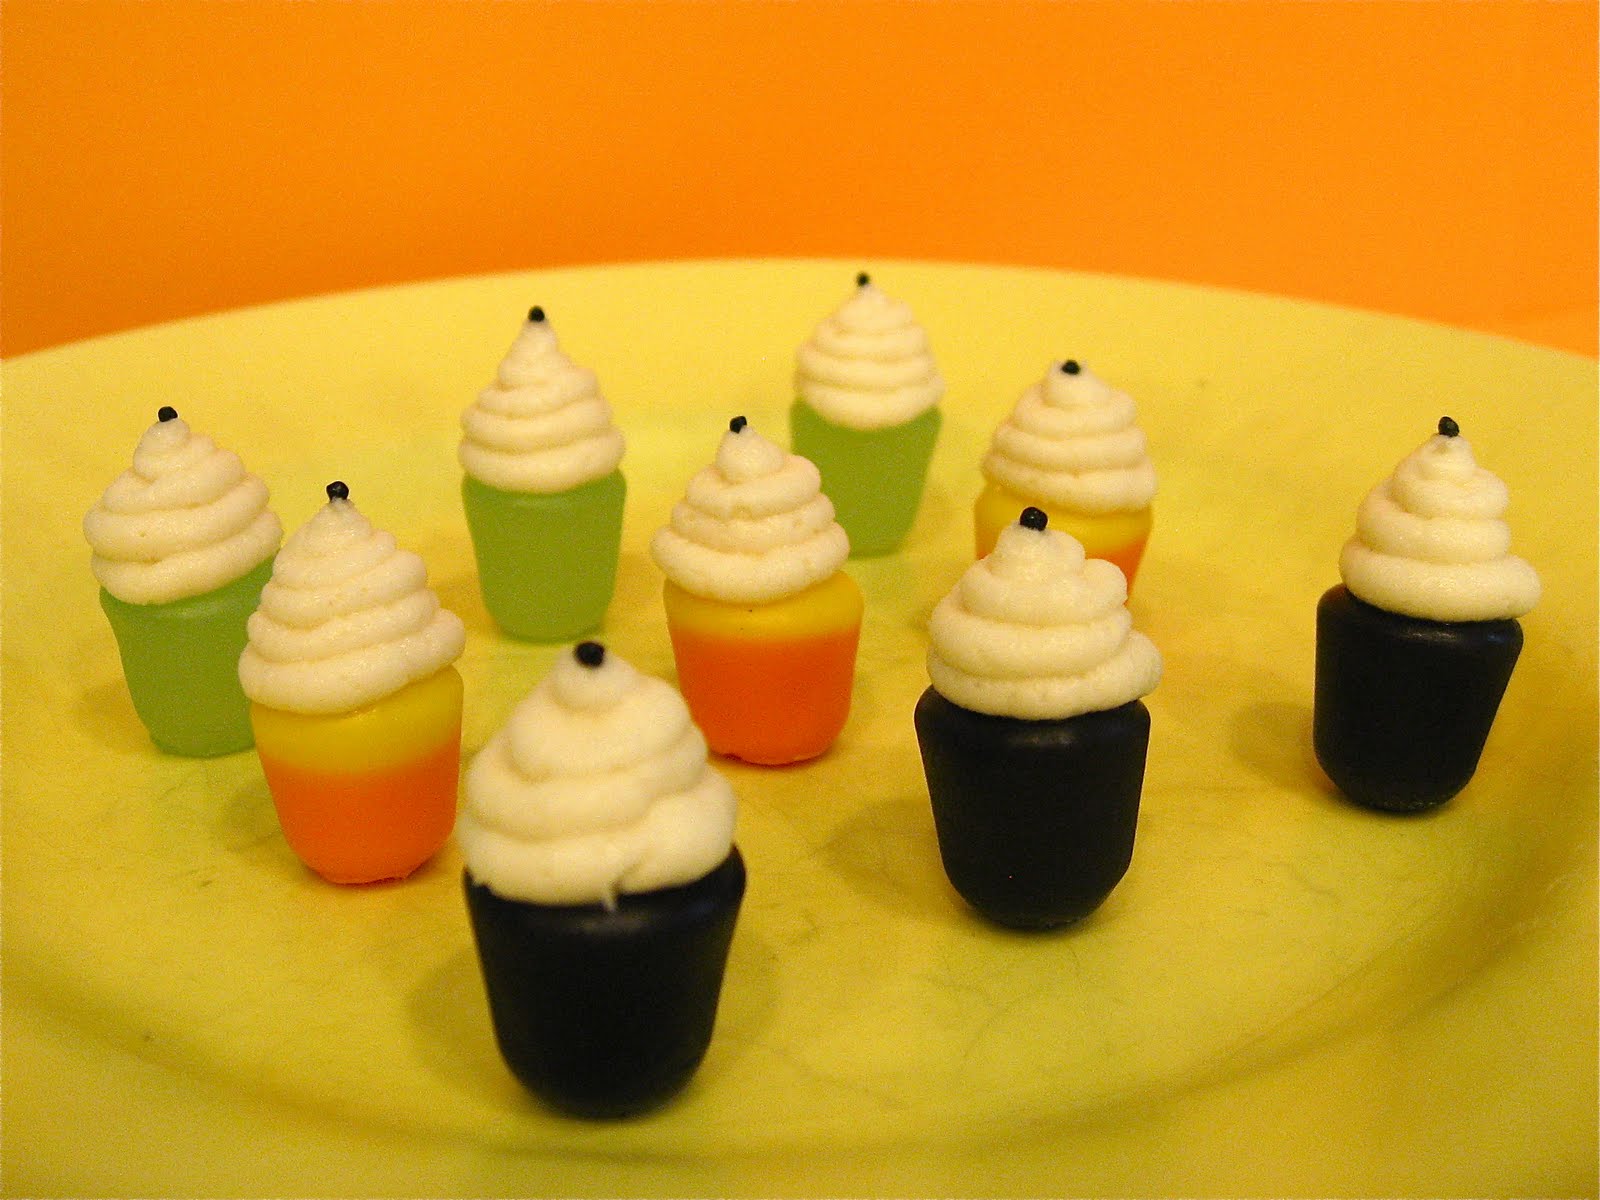 halloween cupcakes candy corn Posted by Michelle Clausen at 8:56 PM